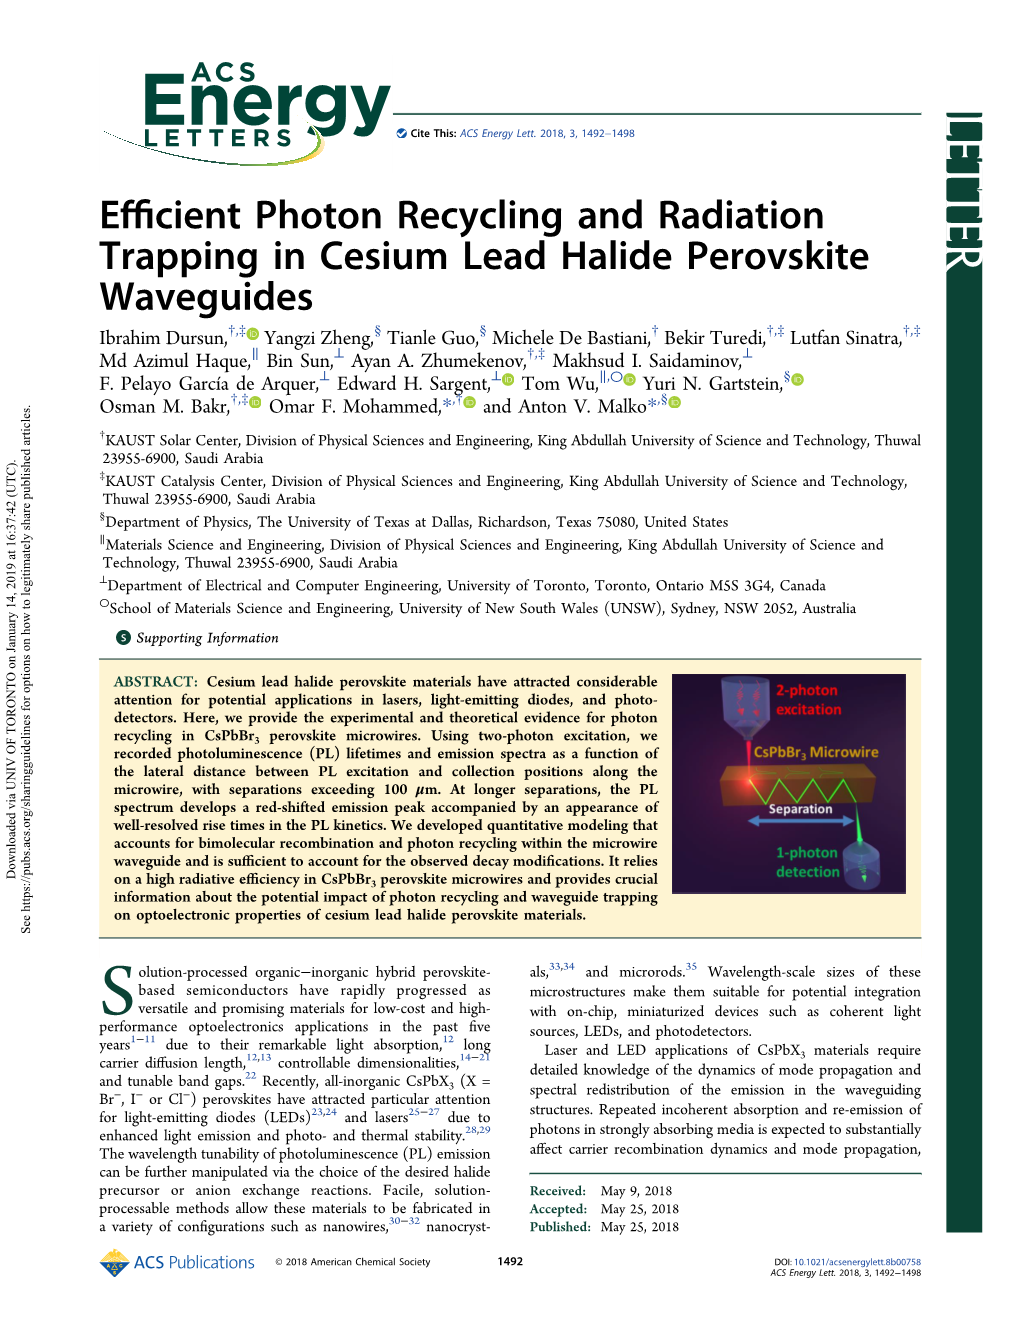 Efficient Photon Recycling and Radiation Trapping in Cesium Lead